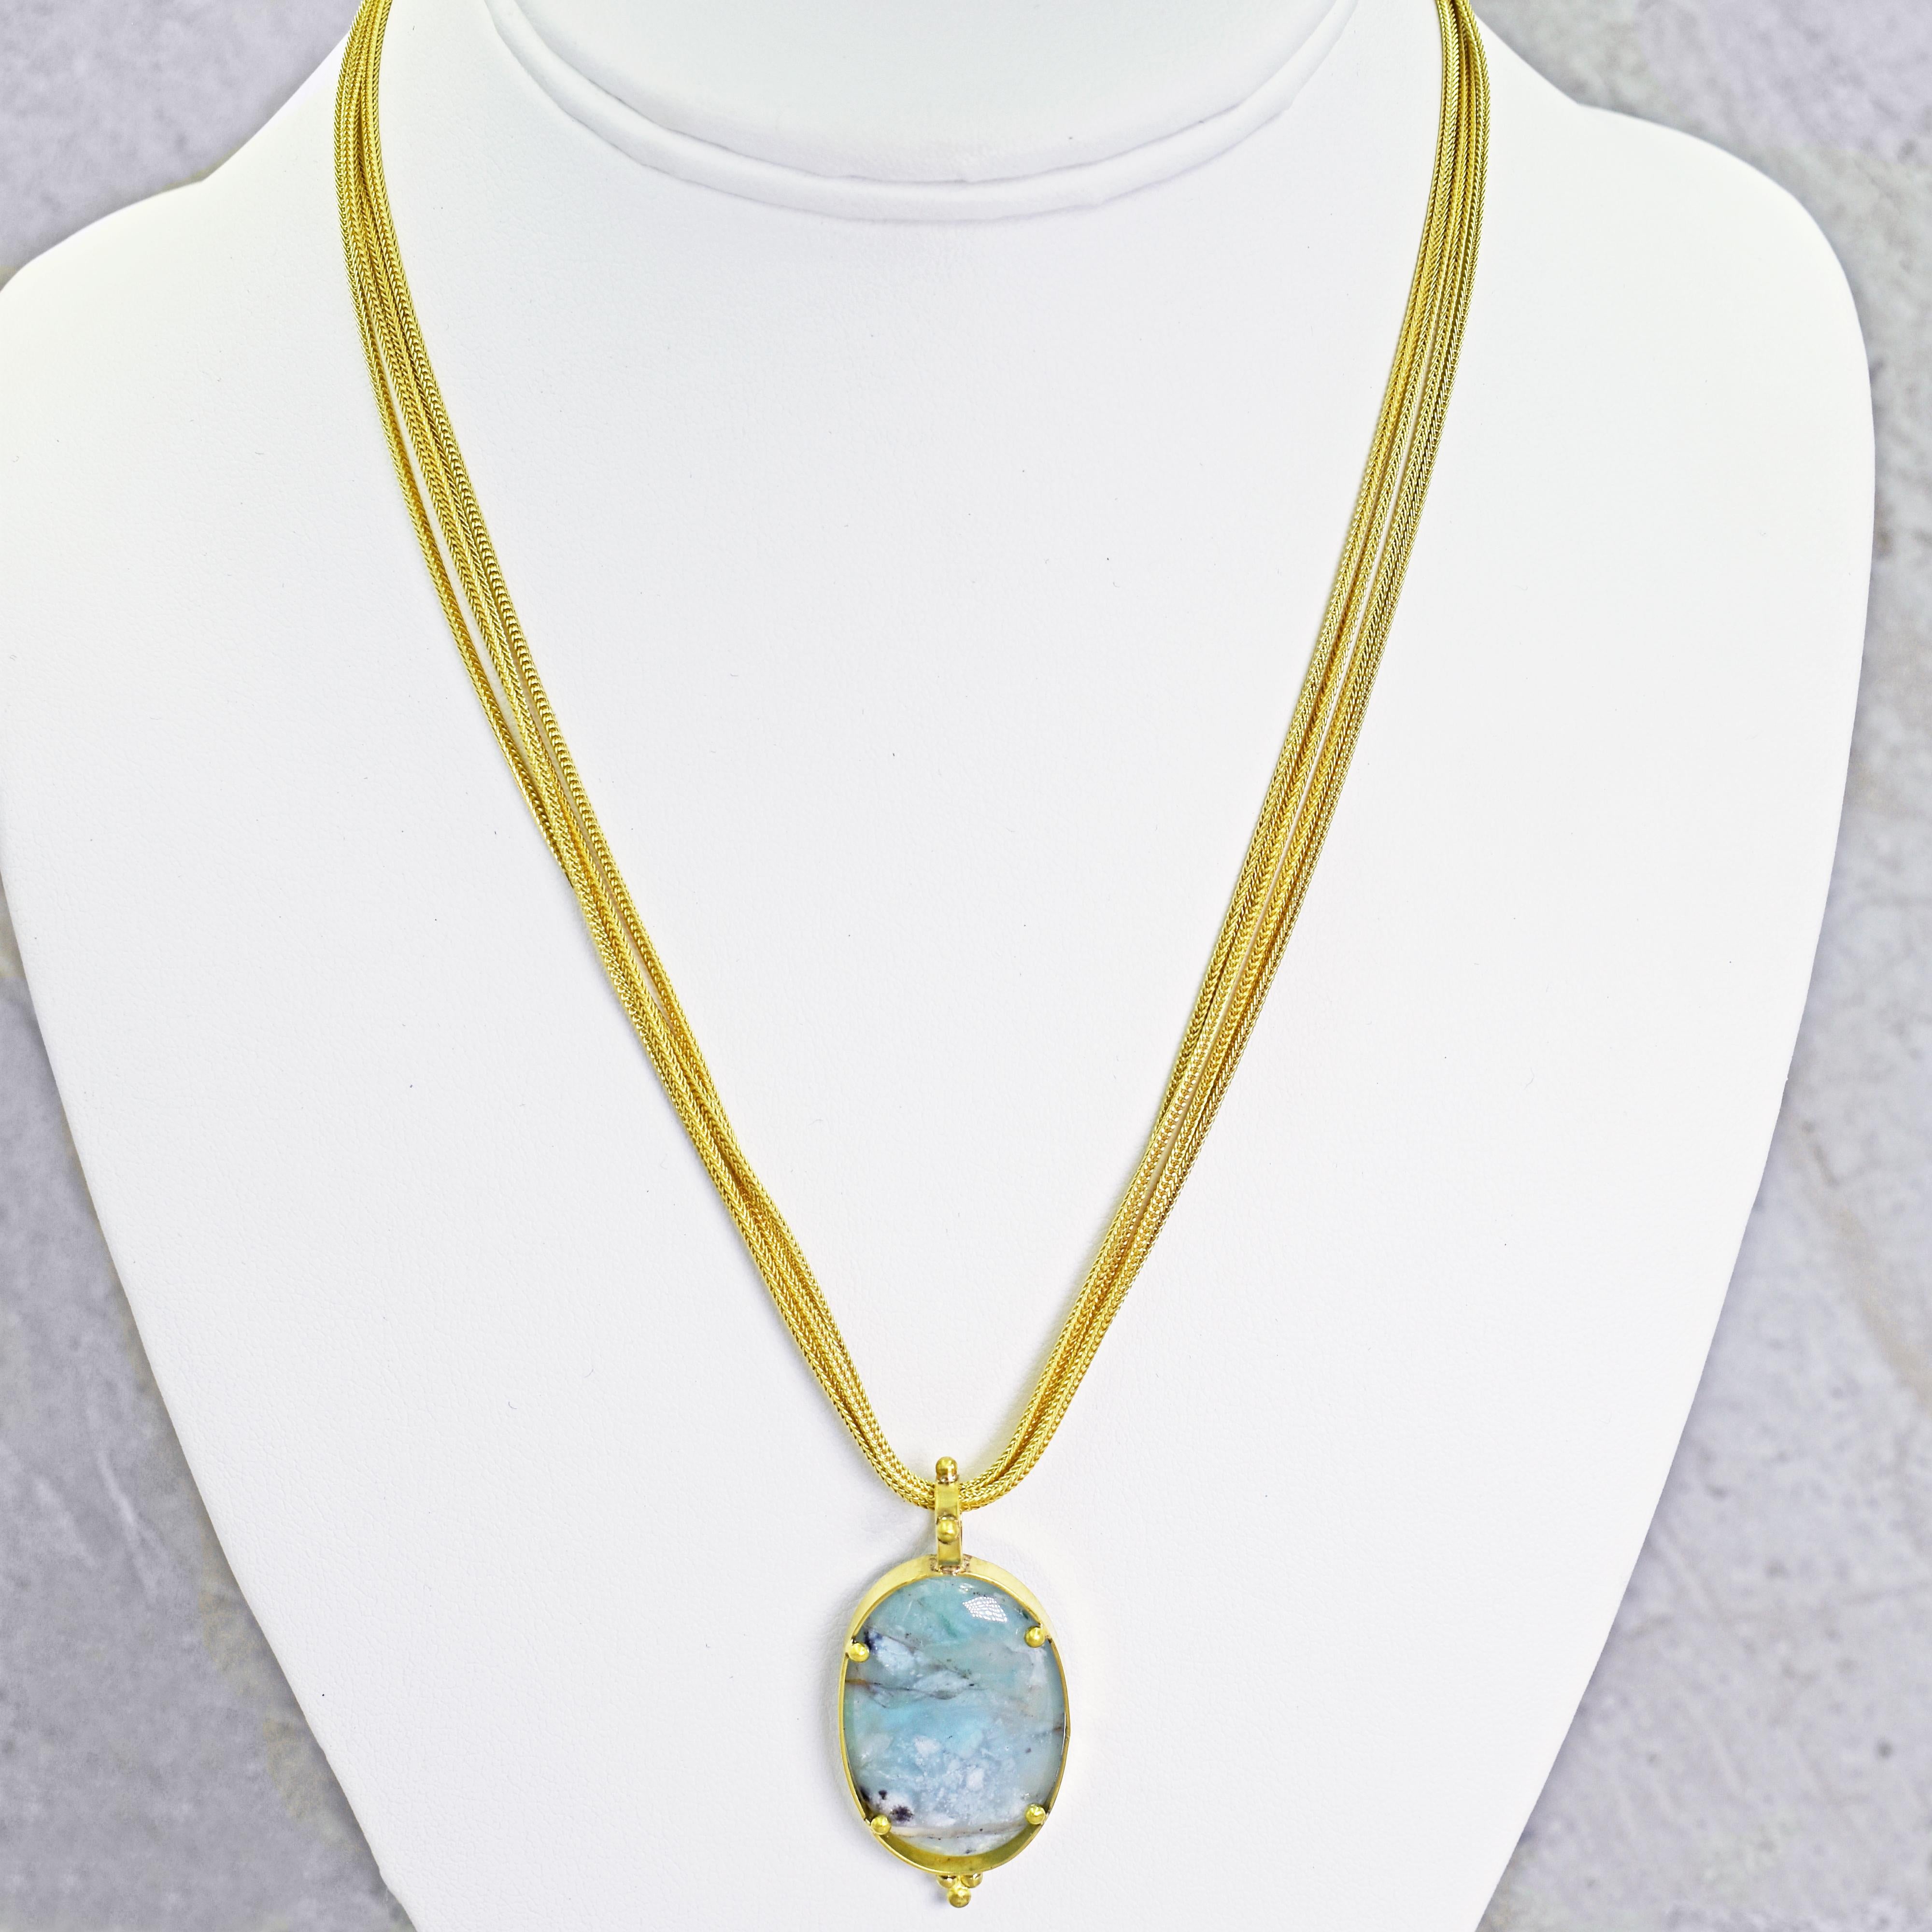 Aquaprase 22 Karat Gold Pendant on Four-Strand Chain Necklace In New Condition For Sale In Naples, FL